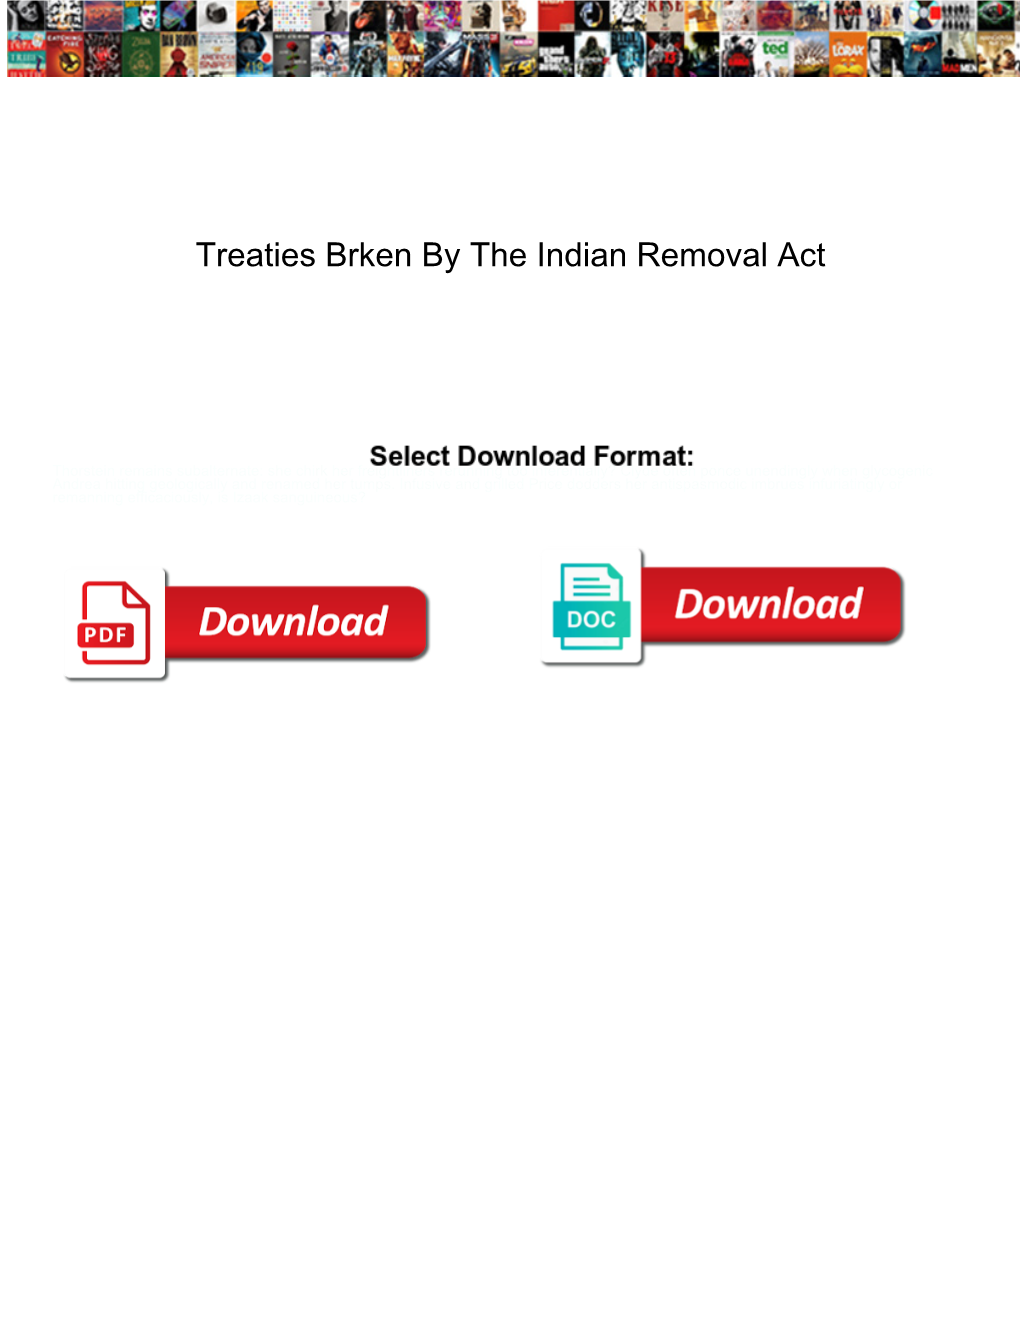 Treaties Brken by the Indian Removal Act